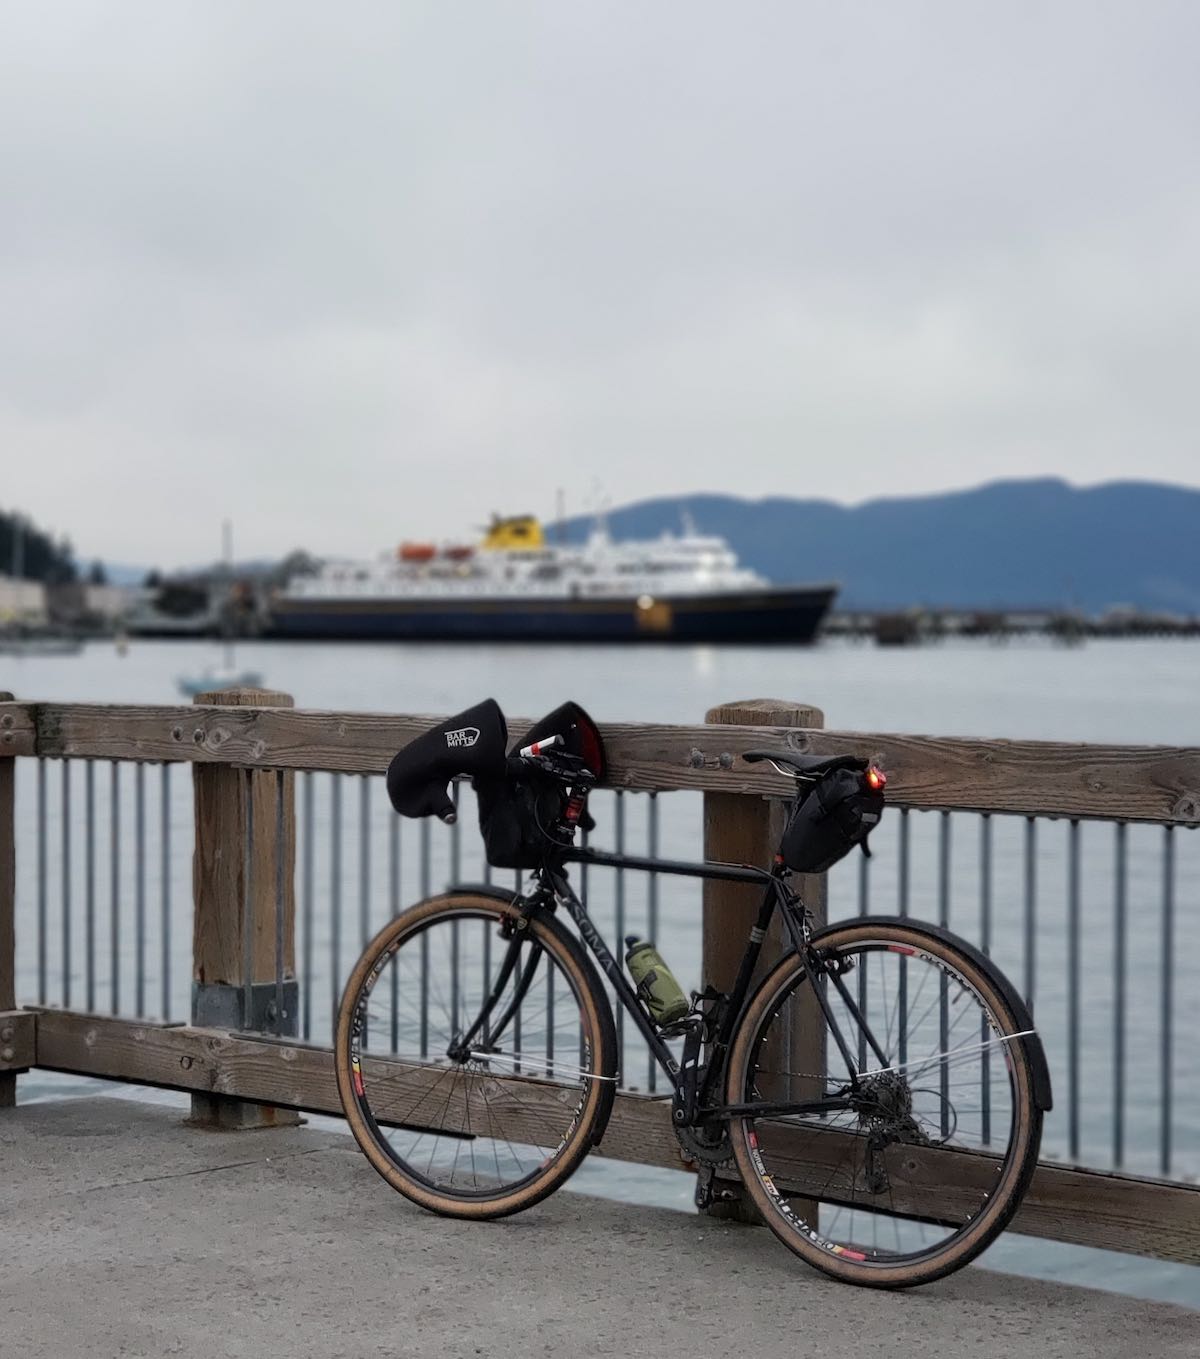 bikerumor pic of the day: touring bicycle leaning up against a fence overlooking the Alaska ferry in the terminal.